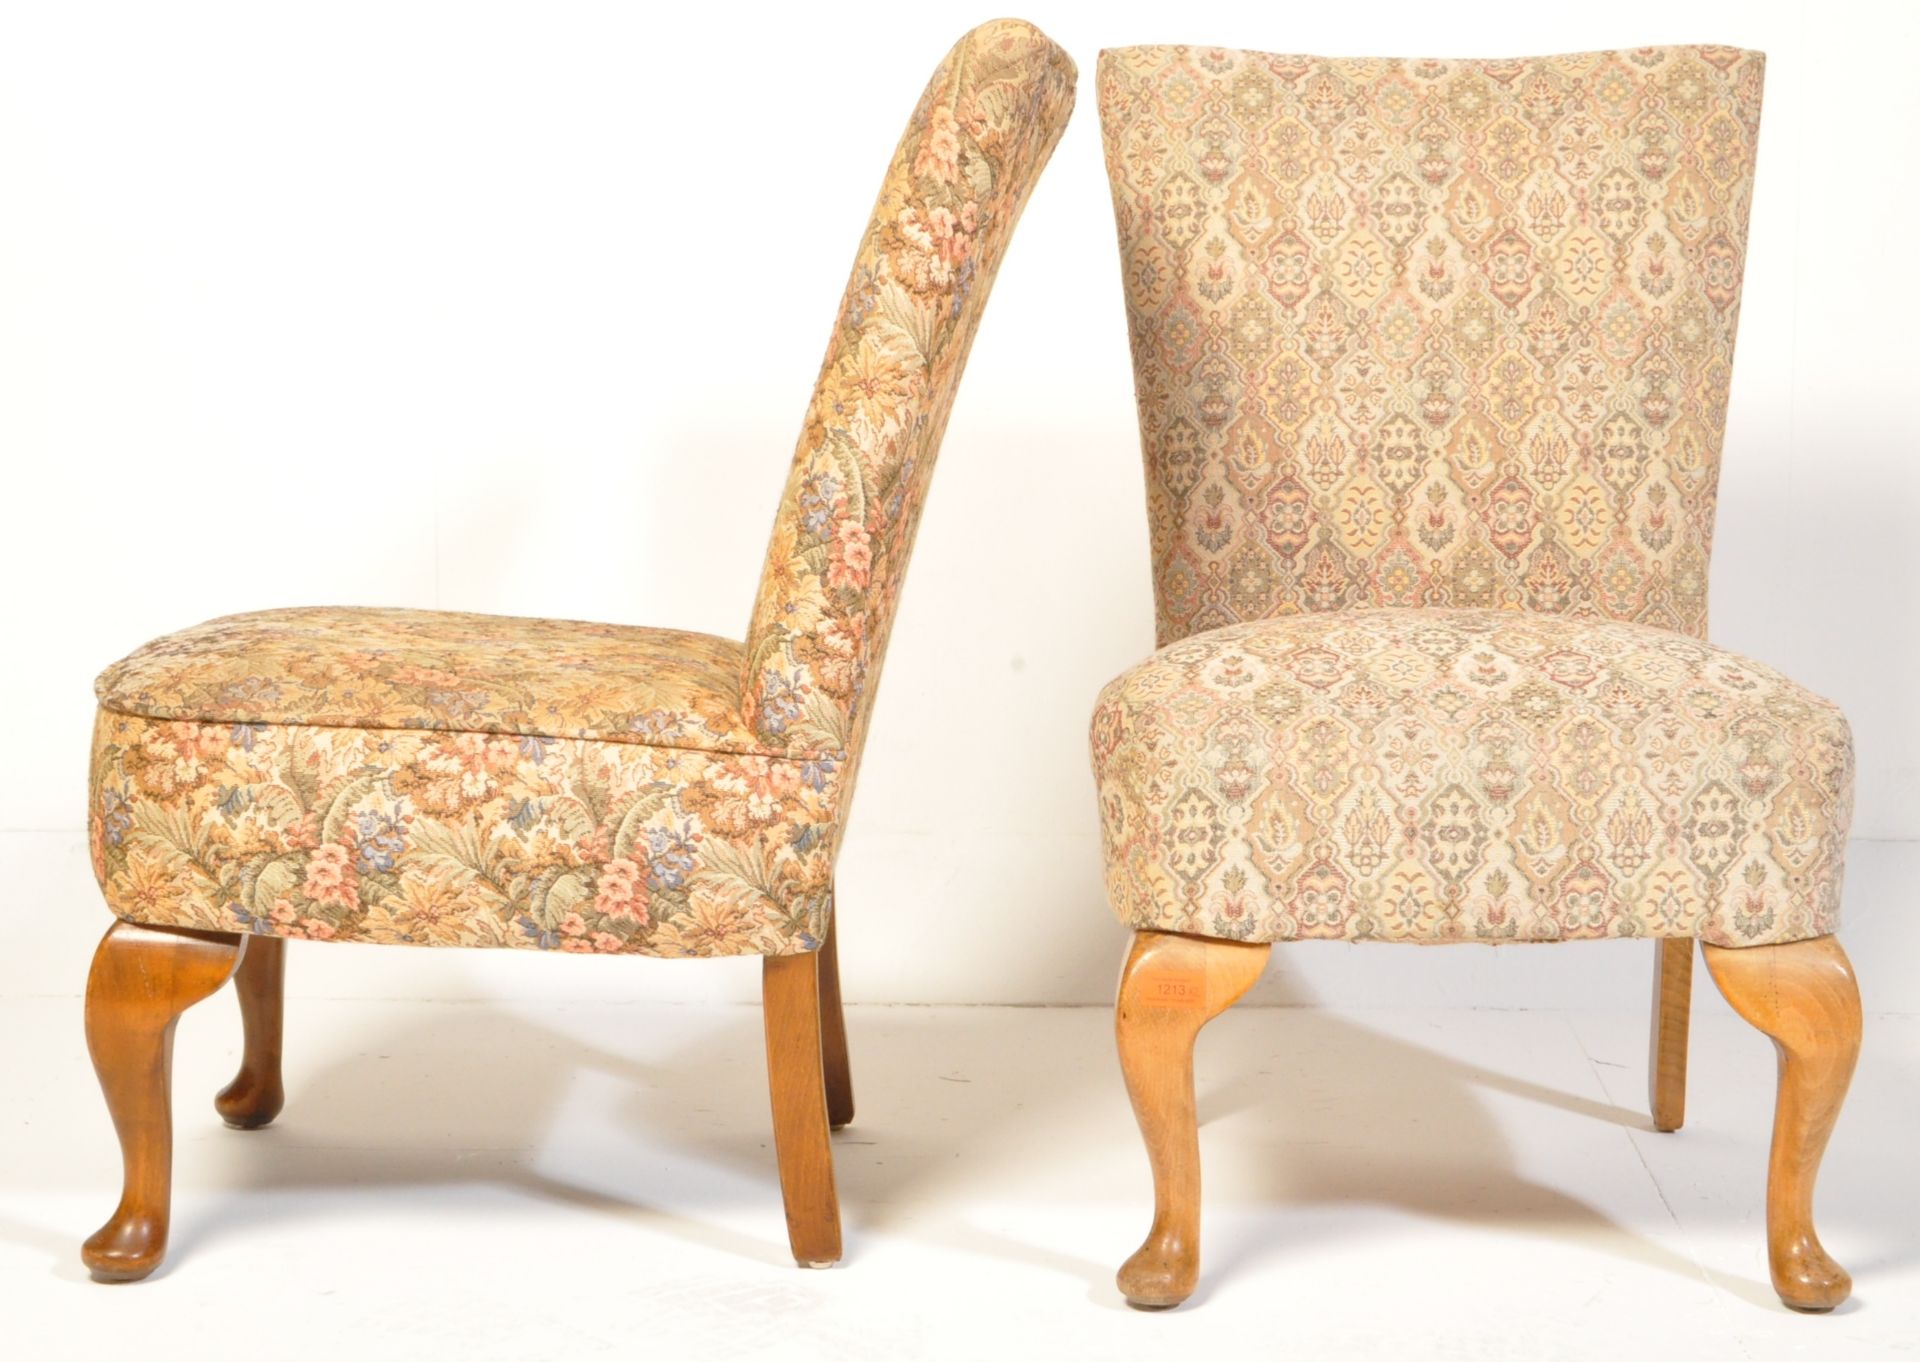 20TH CENTURY RETRO PARKER KNOLL STYLE BEDROOM CHAIRS - Image 7 of 9